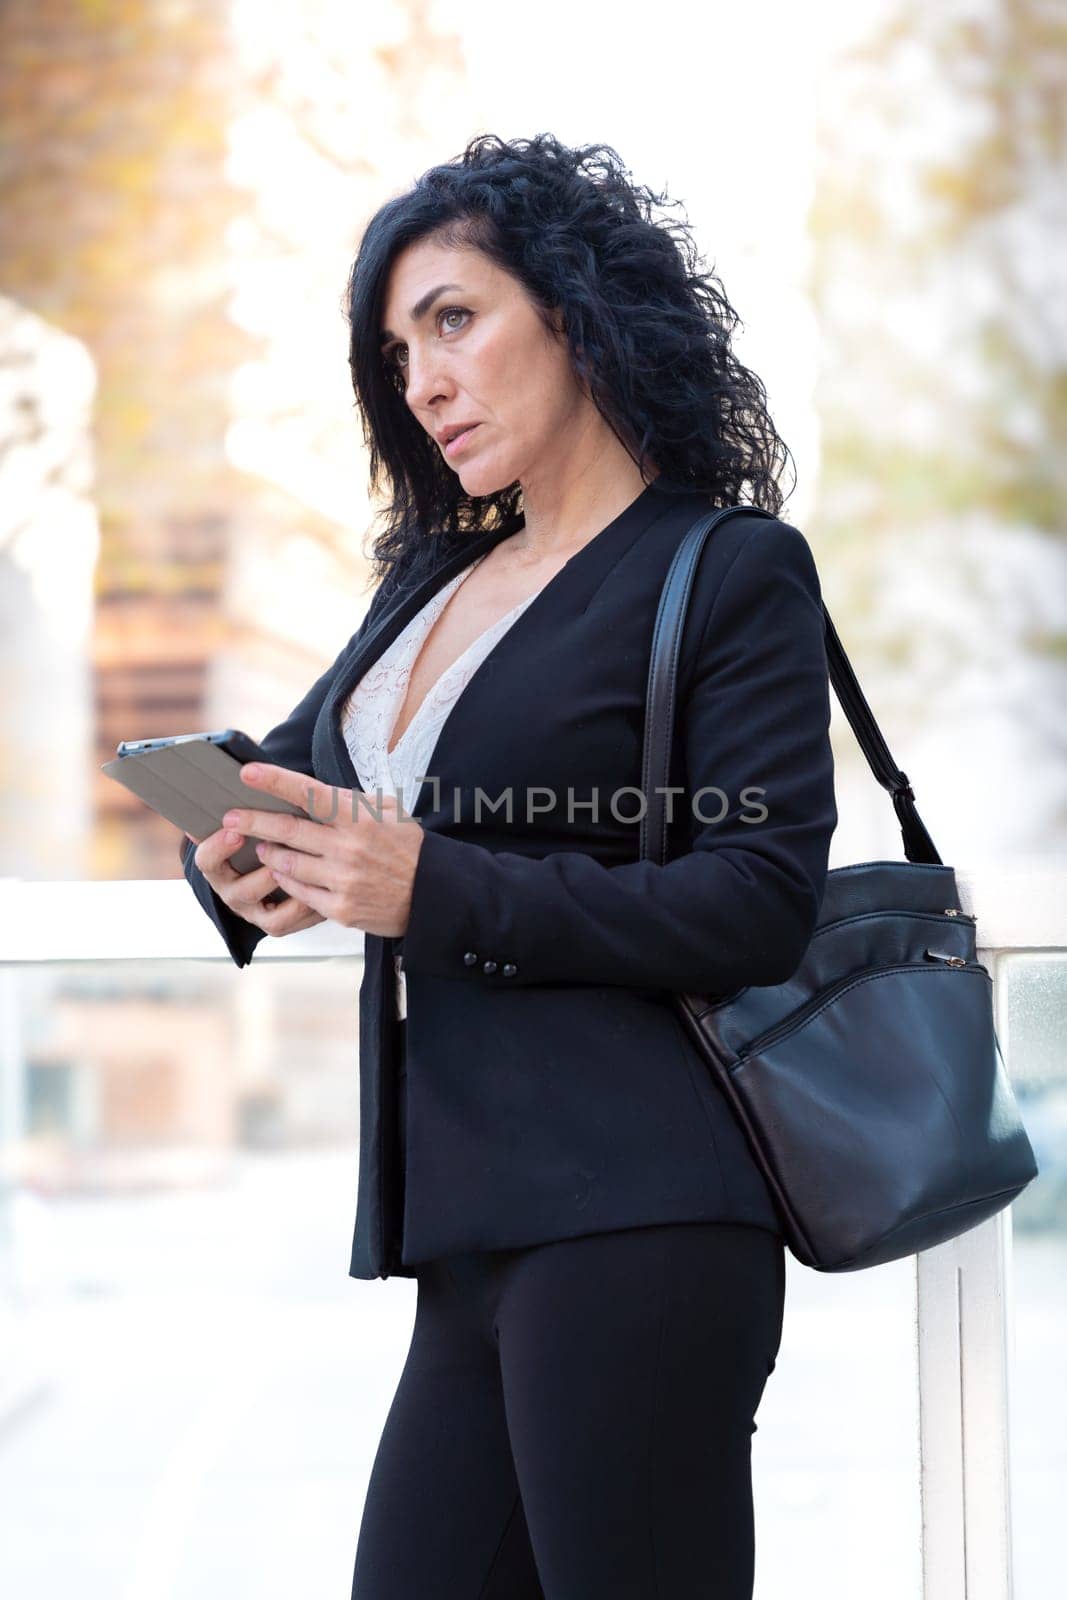 Middle Aged Caucasian Business Woman, Serious Standing With Digital Tablet In Hands